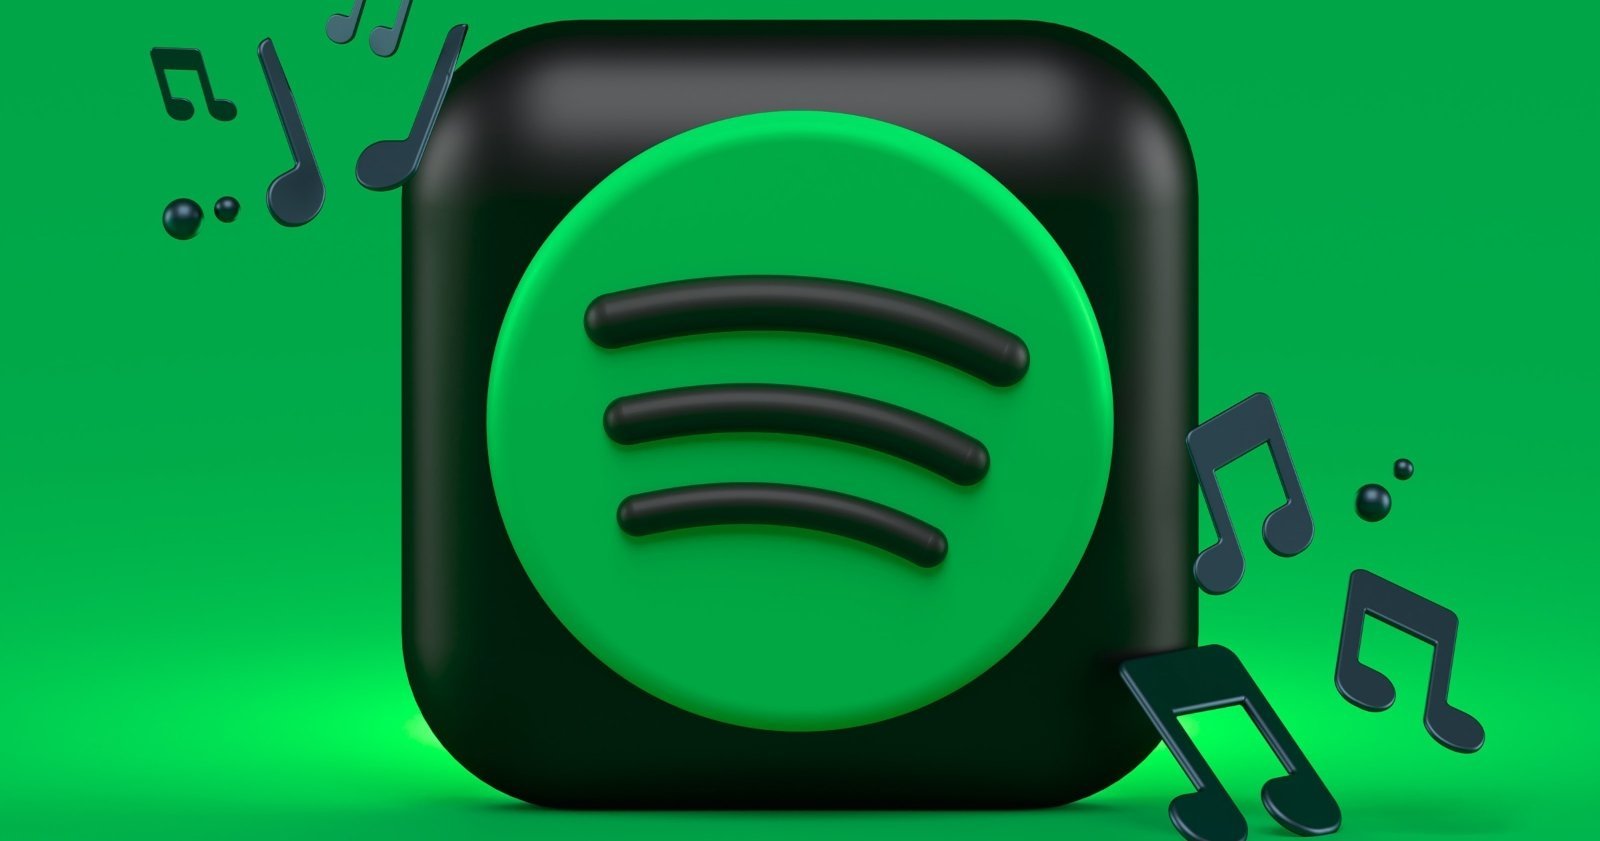 The Spotify app icon